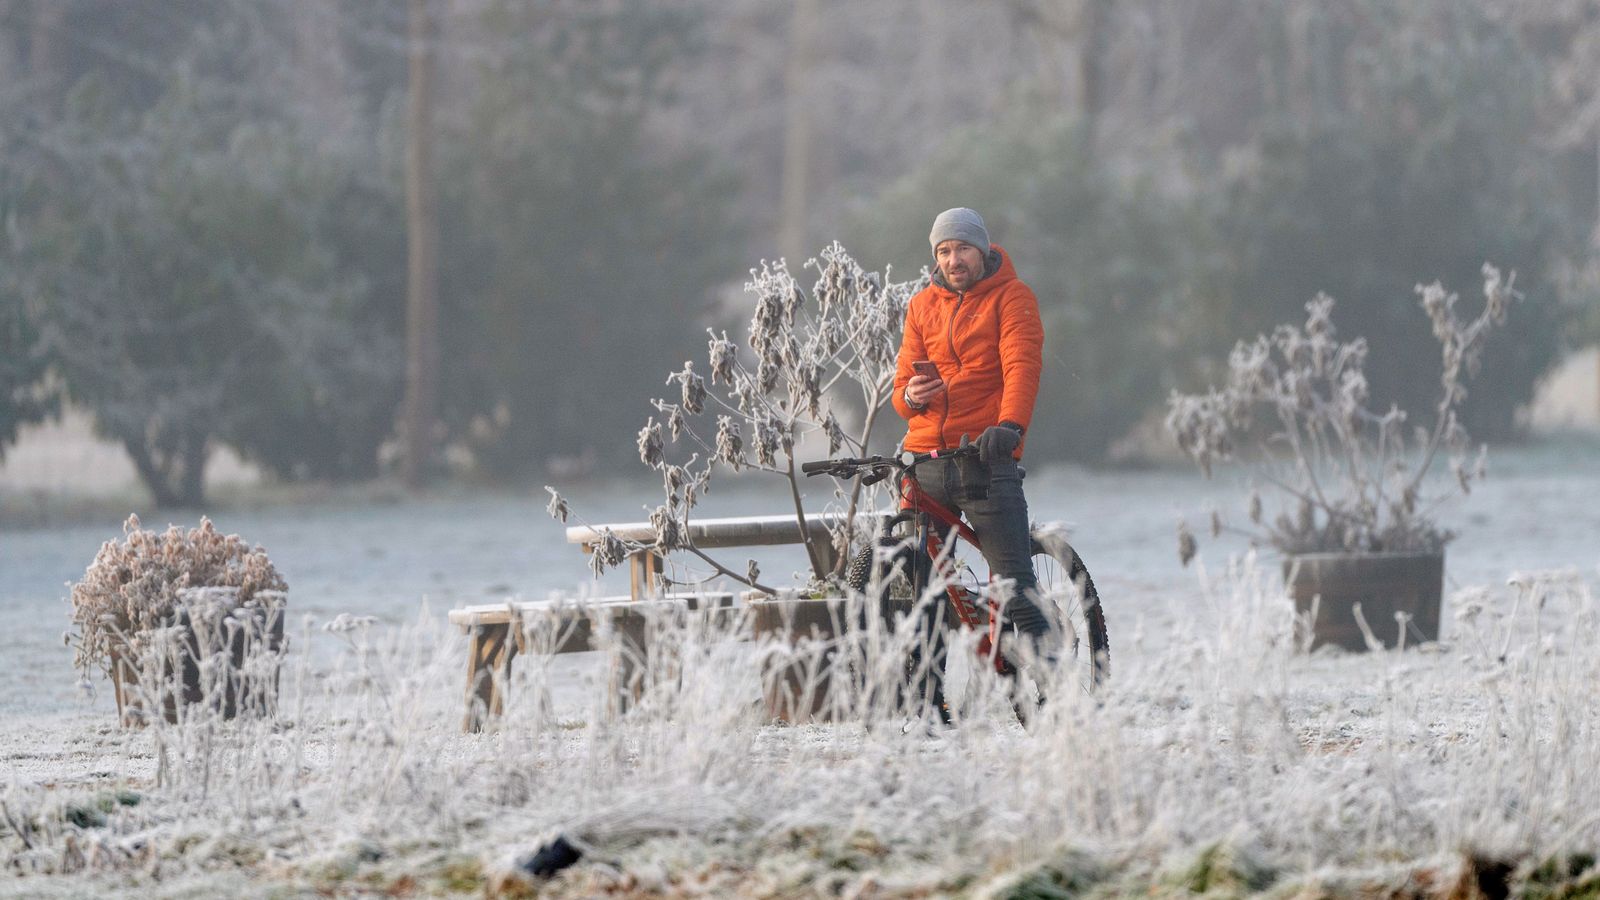 UK weather: More wintry conditions on the way as temperatures may drop to -8C